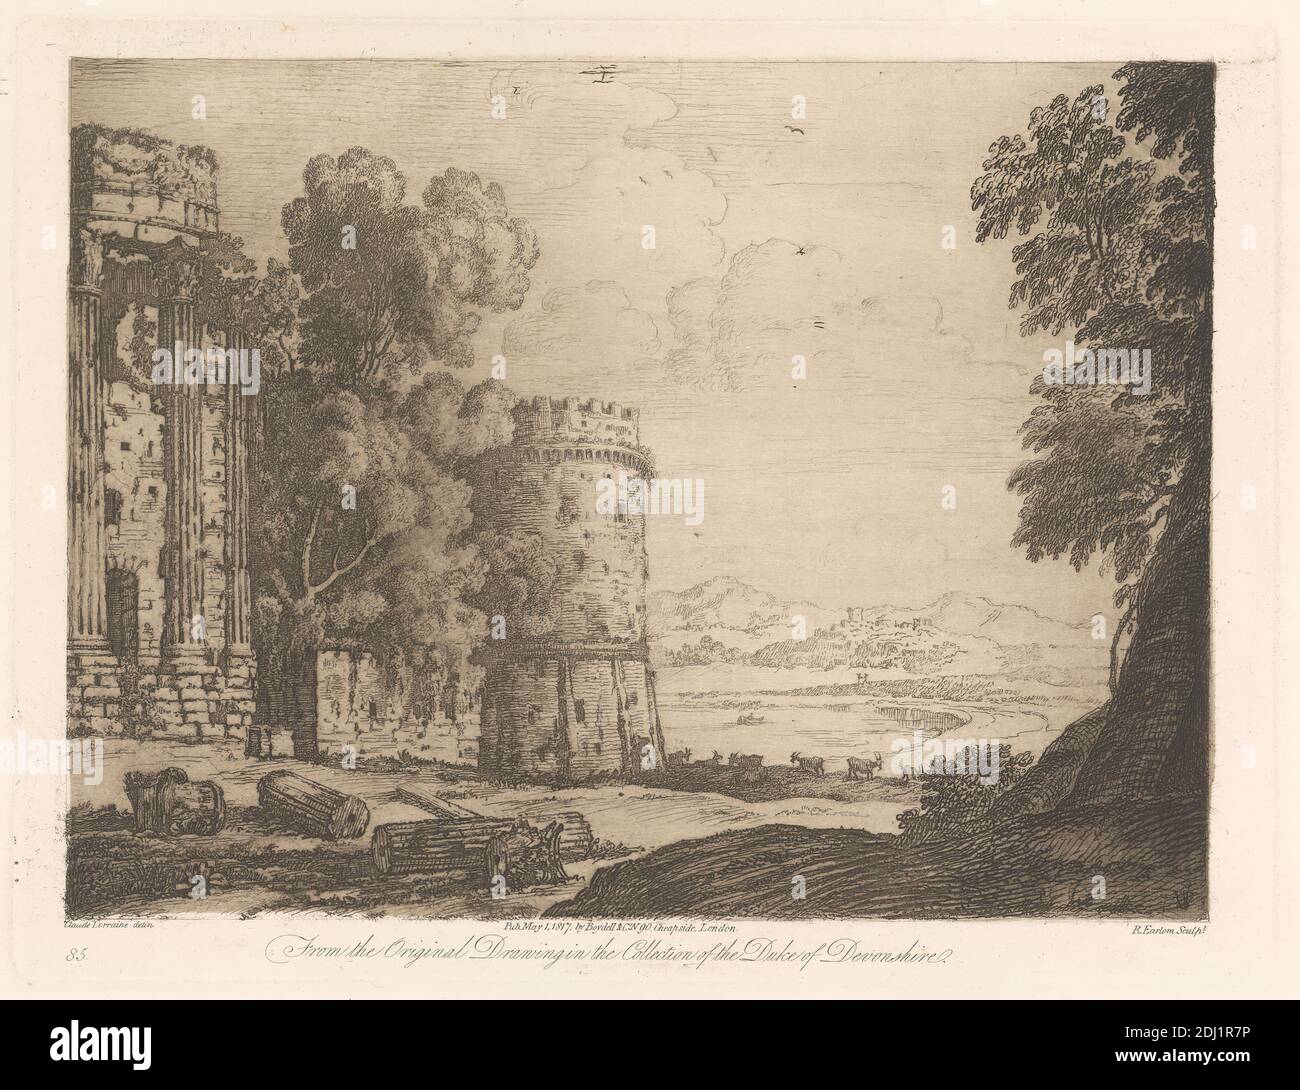 Landscape with Ruins, Print made by Richard Earlom, 1743–1822, British, after Claude Lorrain, 1600–1682, French, Published by Boydell & Co., 1720–1804, British, 1817, Etching and mezzotint in brown ink on moderately thick, slightly textured, cream wove paper, Sheet: 10 9/16 x 16 5/8 inches (26.8 x 42.2 cm), Plate: 8 7/16 x 11 1/8 inches (21.5 x 28.3 cm), and Image: 7 5/8 x 10 1/16 inches (19.3 x 25.5 cm), animals, architectural subject, bridge (built work), castle, columns (architectural elements), figure, fortress, goats, grazing, landscape, pillars, river, road, rowboat, ruins, temple, trees Stock Photo